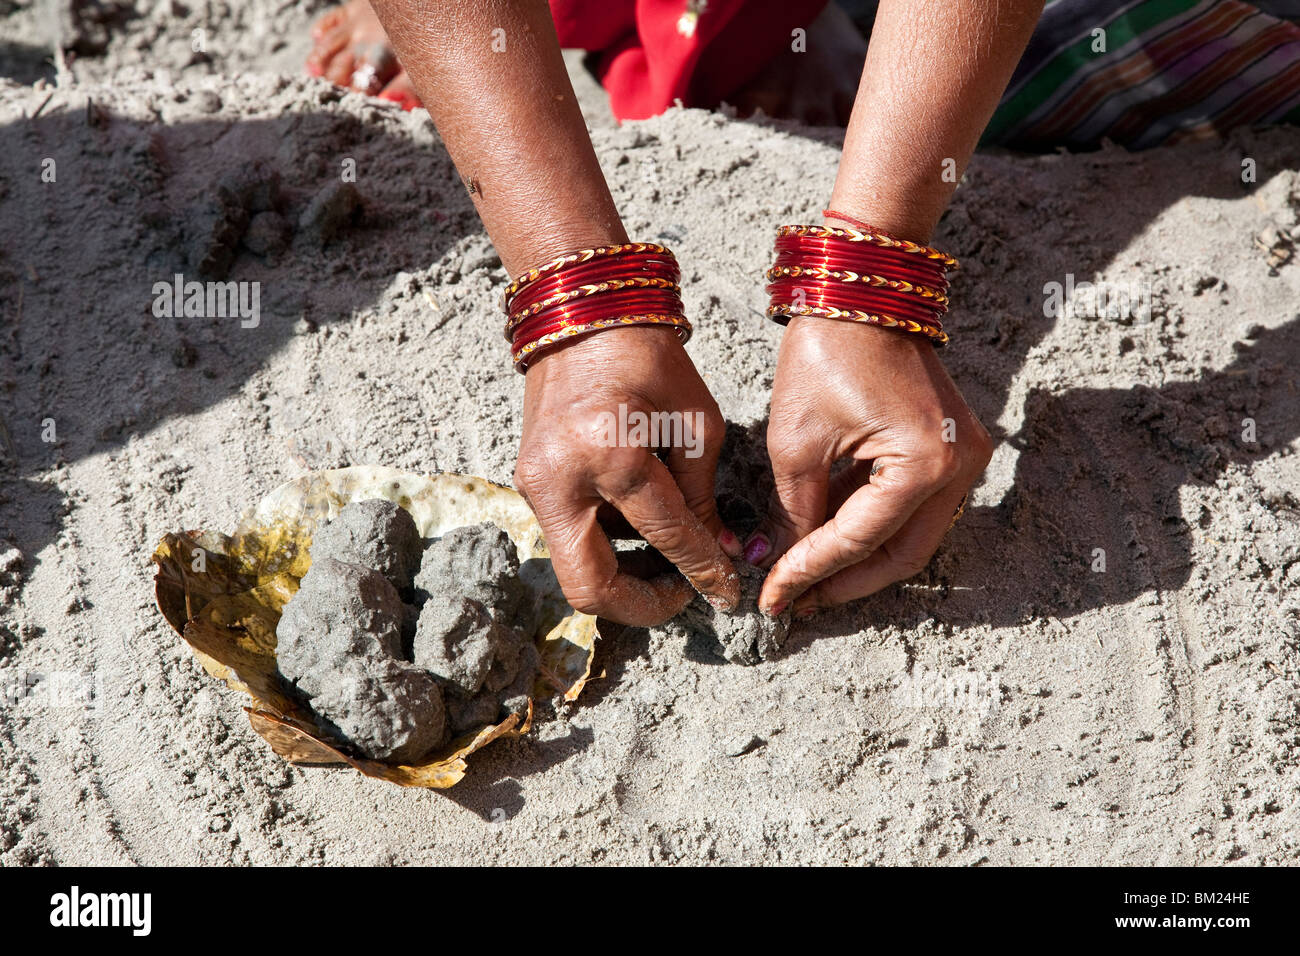 Woman making a ritual puja. Ganges river. Allahabad. India Stock Photo